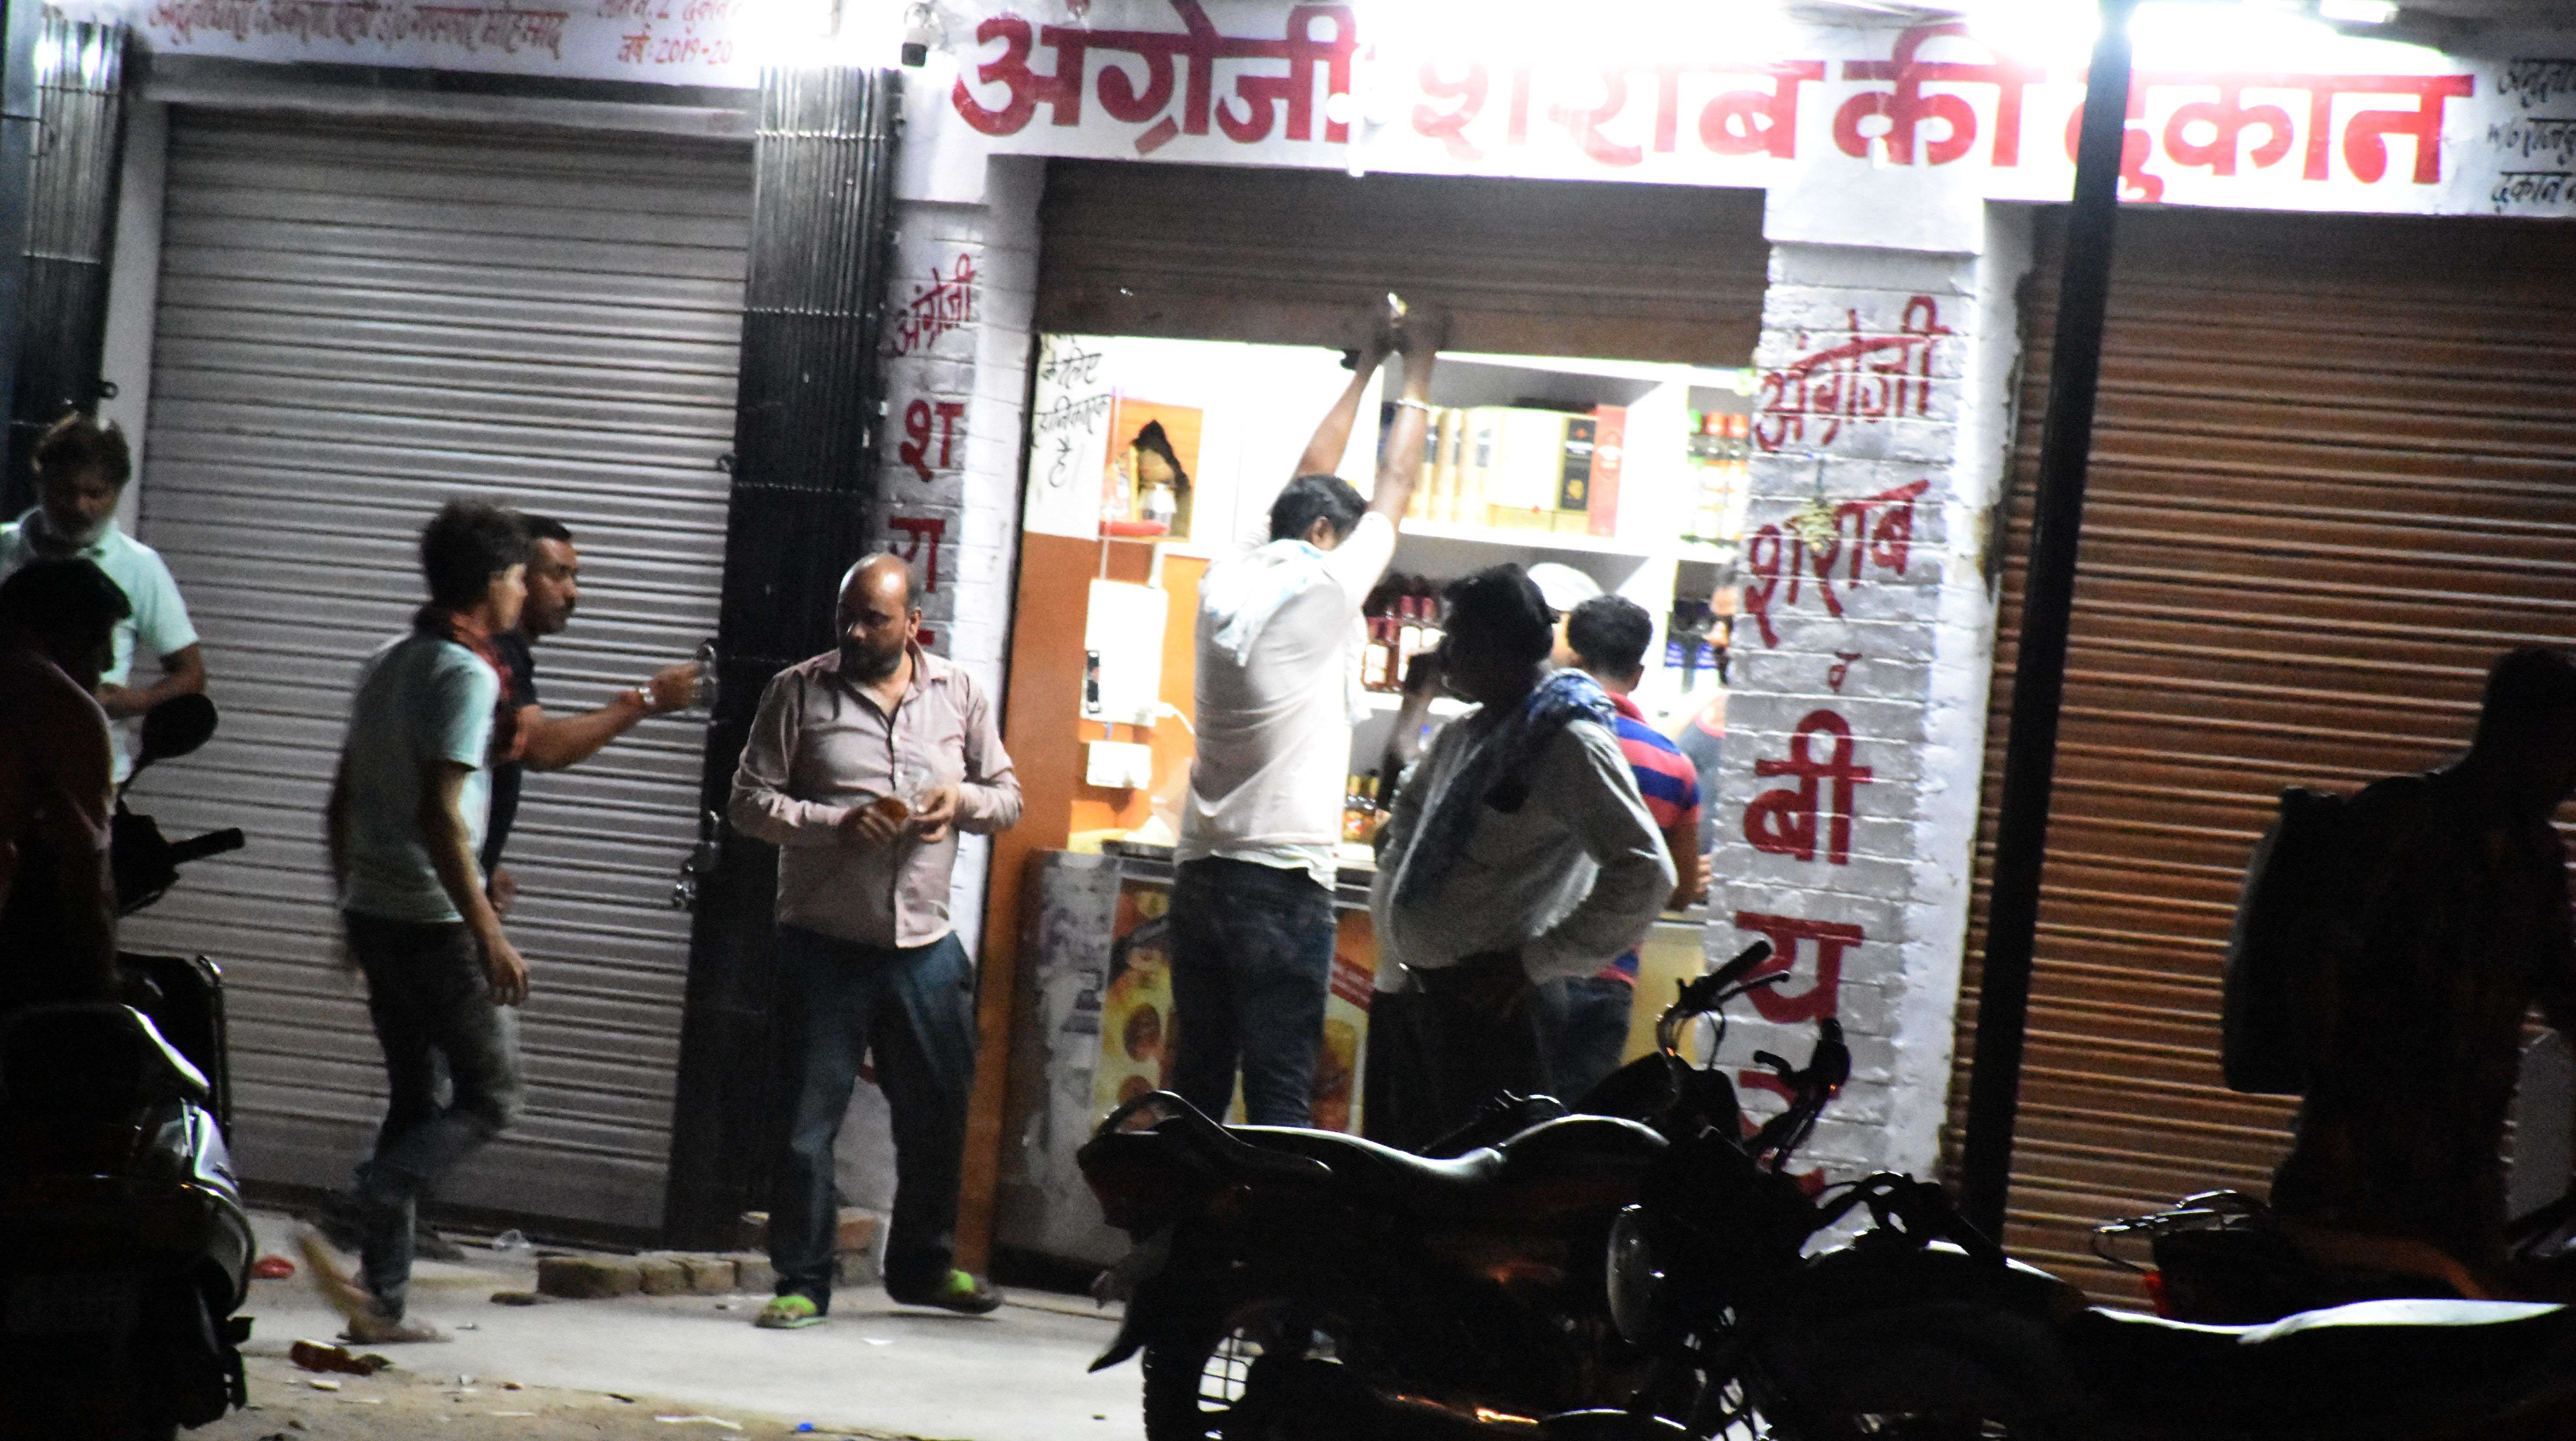 False Eyes: on the illegal sale of alcohol in Bikaner: View photos